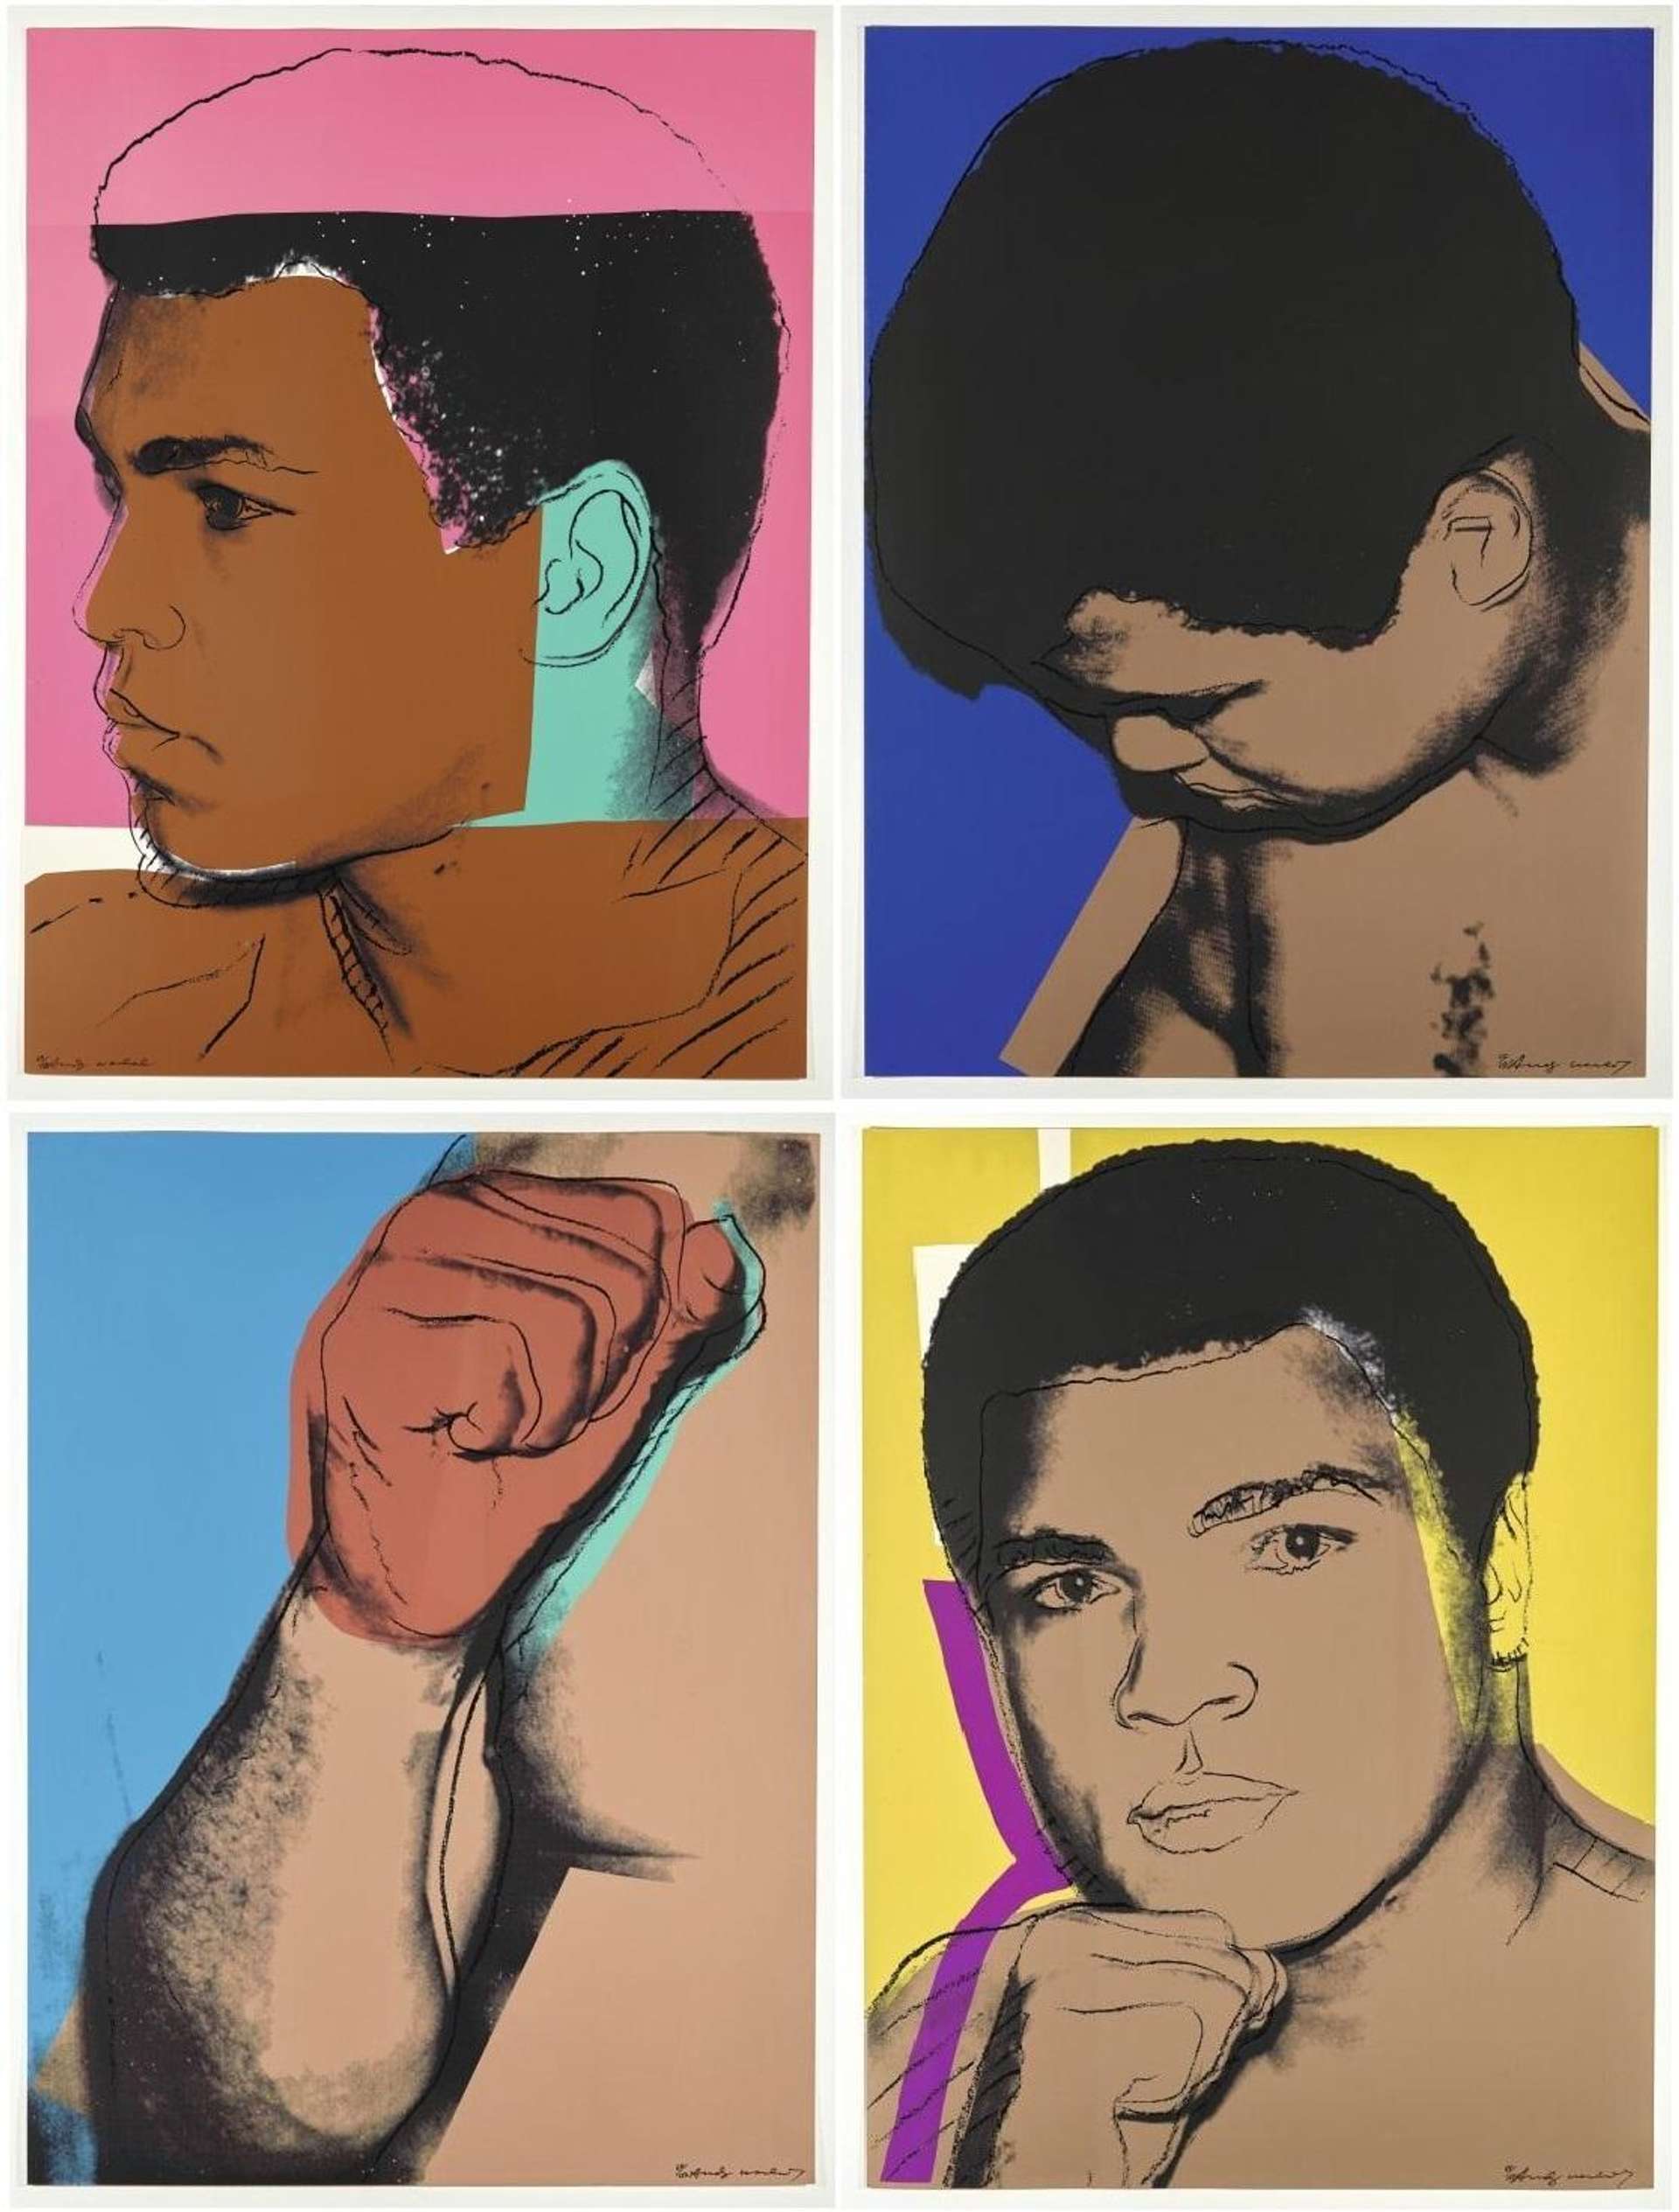 A Guide to Andy Warhol Print Sets